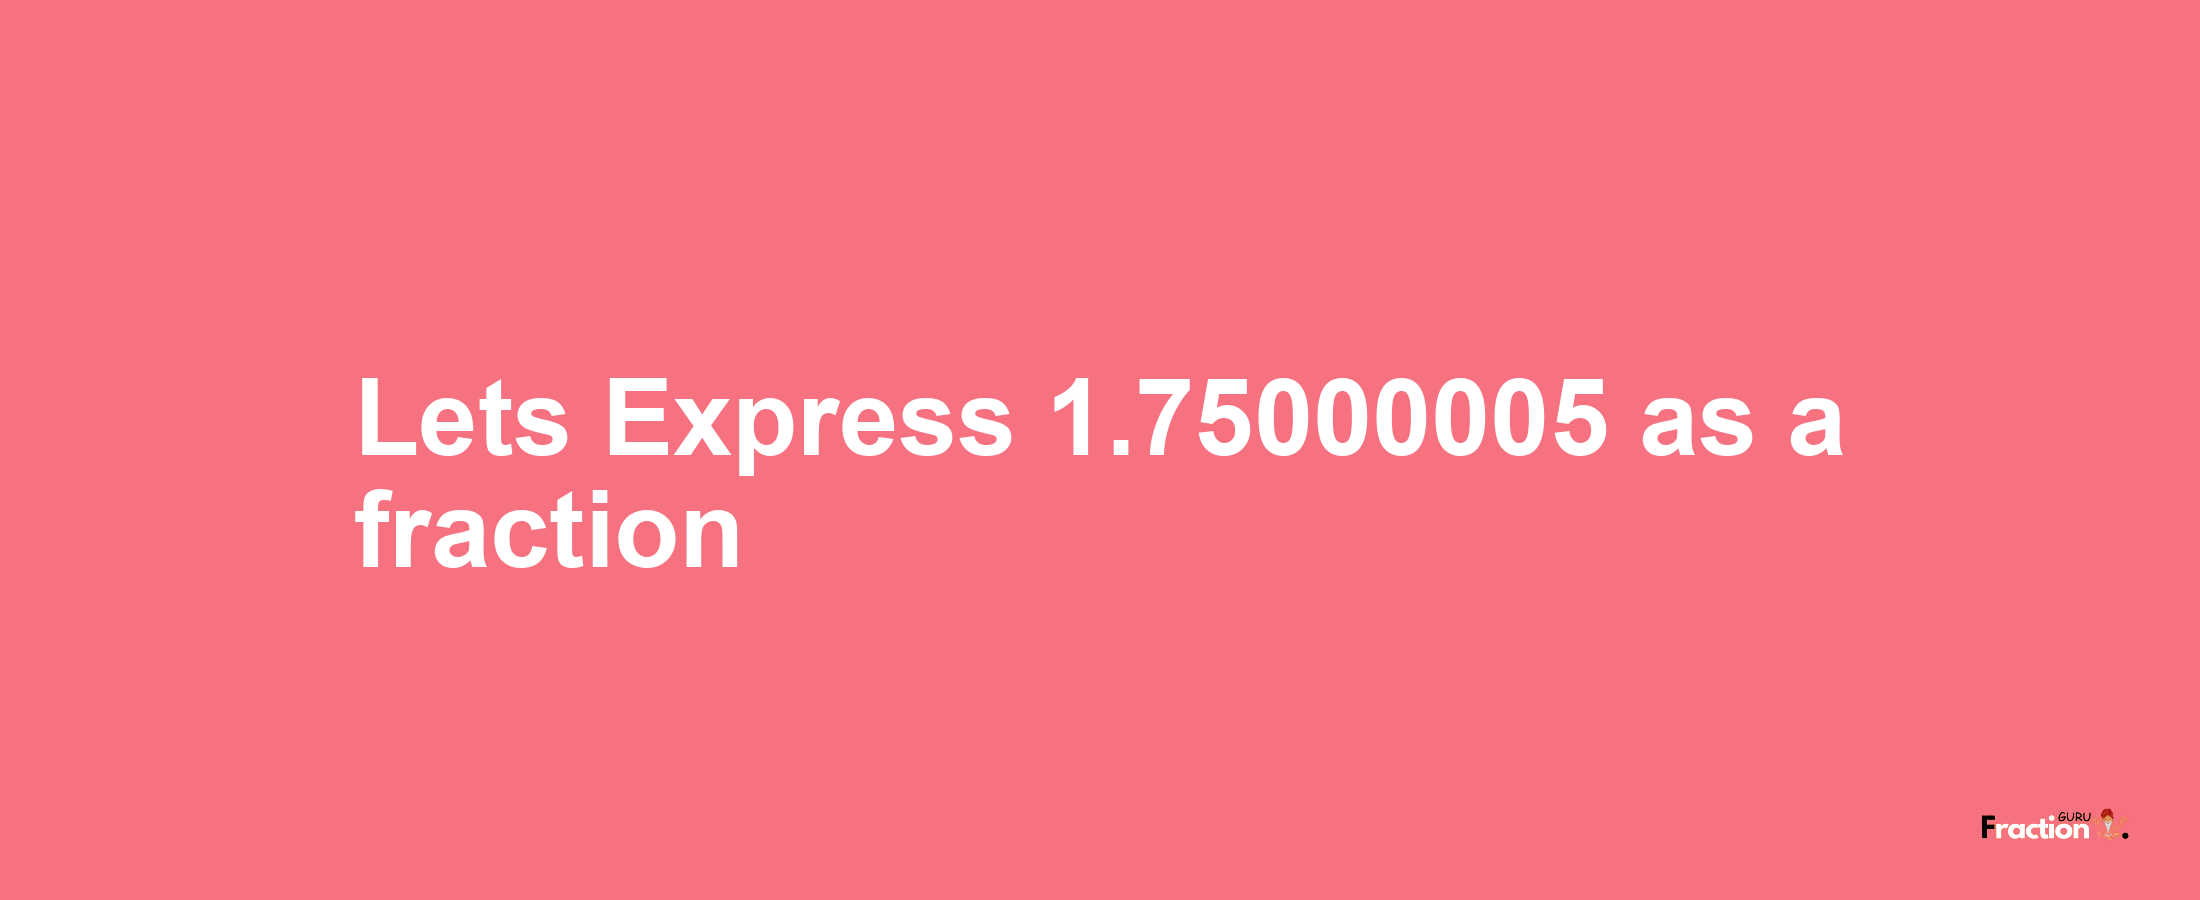 Lets Express 1.75000005 as afraction